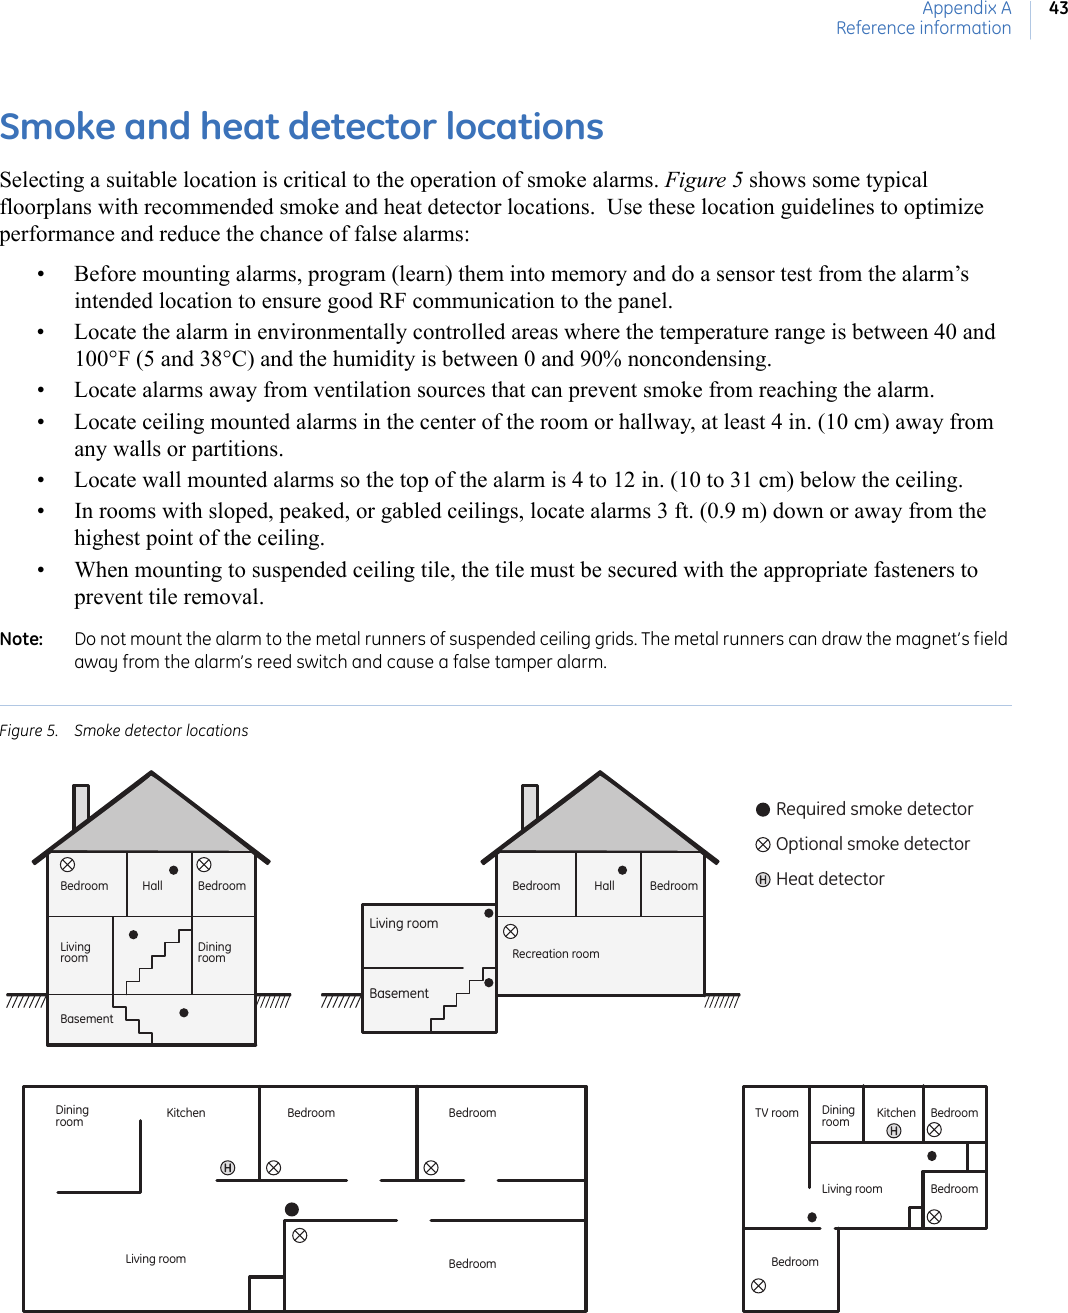 Appendix AReference information43Smoke and heat detector locationsSelecting a suitable location is critical to the operation of smoke alarms. Figure 5 shows some typical floorplans with recommended smoke and heat detector locations.  Use these location guidelines to optimize performance and reduce the chance of false alarms:• Before mounting alarms, program (learn) them into memory and do a sensor test from the alarm’s intended location to ensure good RF communication to the panel.• Locate the alarm in environmentally controlled areas where the temperature range is between 40 and 100°F (5 and 38°C) and the humidity is between 0 and 90% noncondensing.• Locate alarms away from ventilation sources that can prevent smoke from reaching the alarm.• Locate ceiling mounted alarms in the center of the room or hallway, at least 4 in. (10 cm) away from any walls or partitions.• Locate wall mounted alarms so the top of the alarm is 4 to 12 in. (10 to 31 cm) below the ceiling.• In rooms with sloped, peaked, or gabled ceilings, locate alarms 3 ft. (0.9 m) down or away from the highest point of the ceiling.• When mounting to suspended ceiling tile, the tile must be secured with the appropriate fasteners to prevent tile removal.Note:   Do not mount the alarm to the metal runners of suspended ceiling grids. The metal runners can draw the magnet’s field away from the alarm’s reed switch and cause a false tamper alarm.Figure 5. Smoke detector locationsLiving room BedroomLiving roomDiningroom KitchenBedroomBedroomBedroom TV room Diningroom KitchenBedroomBedroomLiving roomBasementDining roomBasementLiving roomHall BedroomBedroomRecreation roomHall BedroomBedroomRequired smoke detectorHeat detectorOptional smoke detector